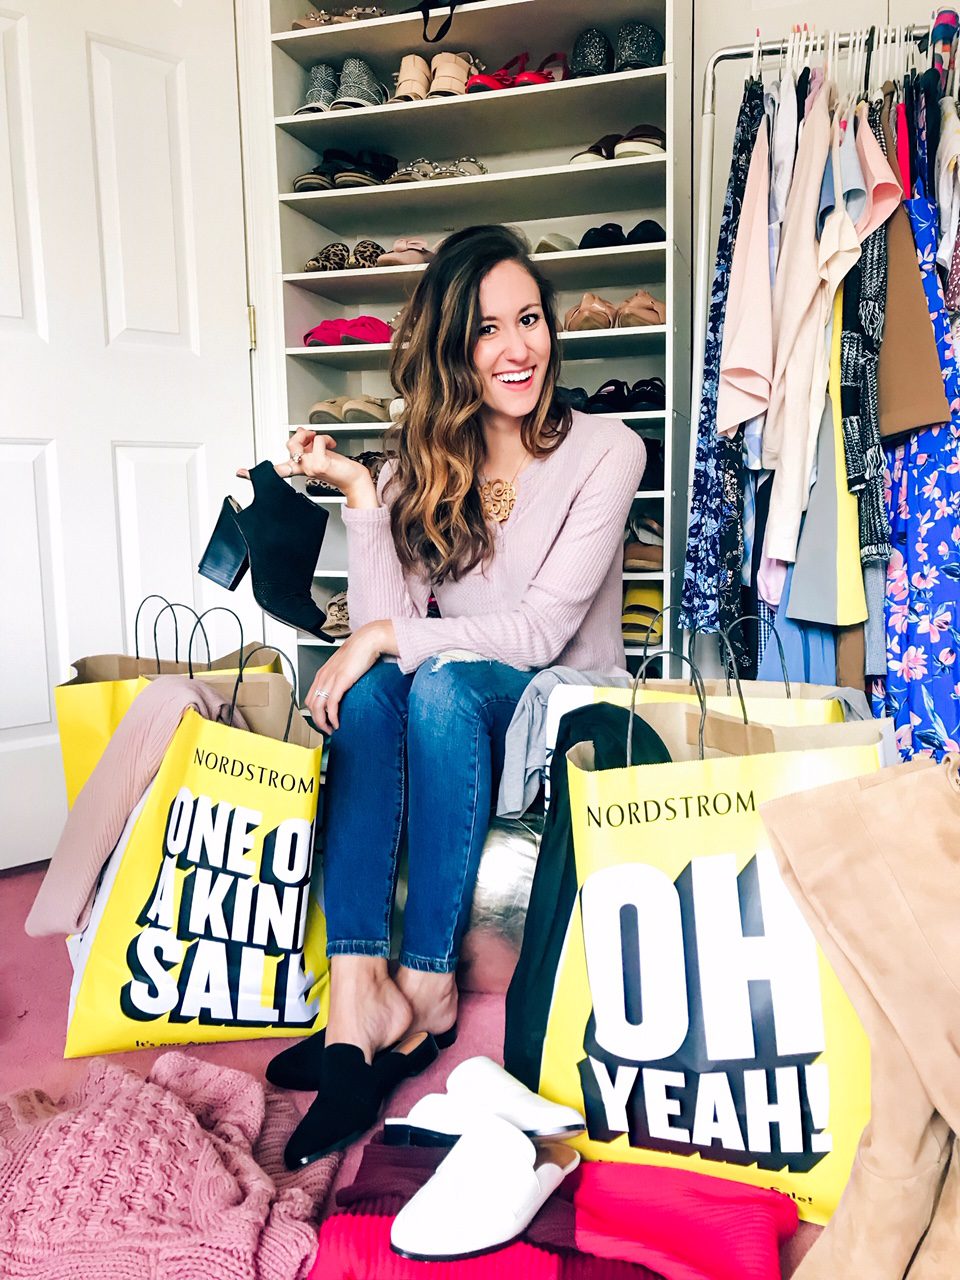 Everything you need to know about the Nordstrom Anniversary Sale - Key dates, How to shop it EARLY, A sneak peek at what will be on sale, + MORE - on Coming Up Roses